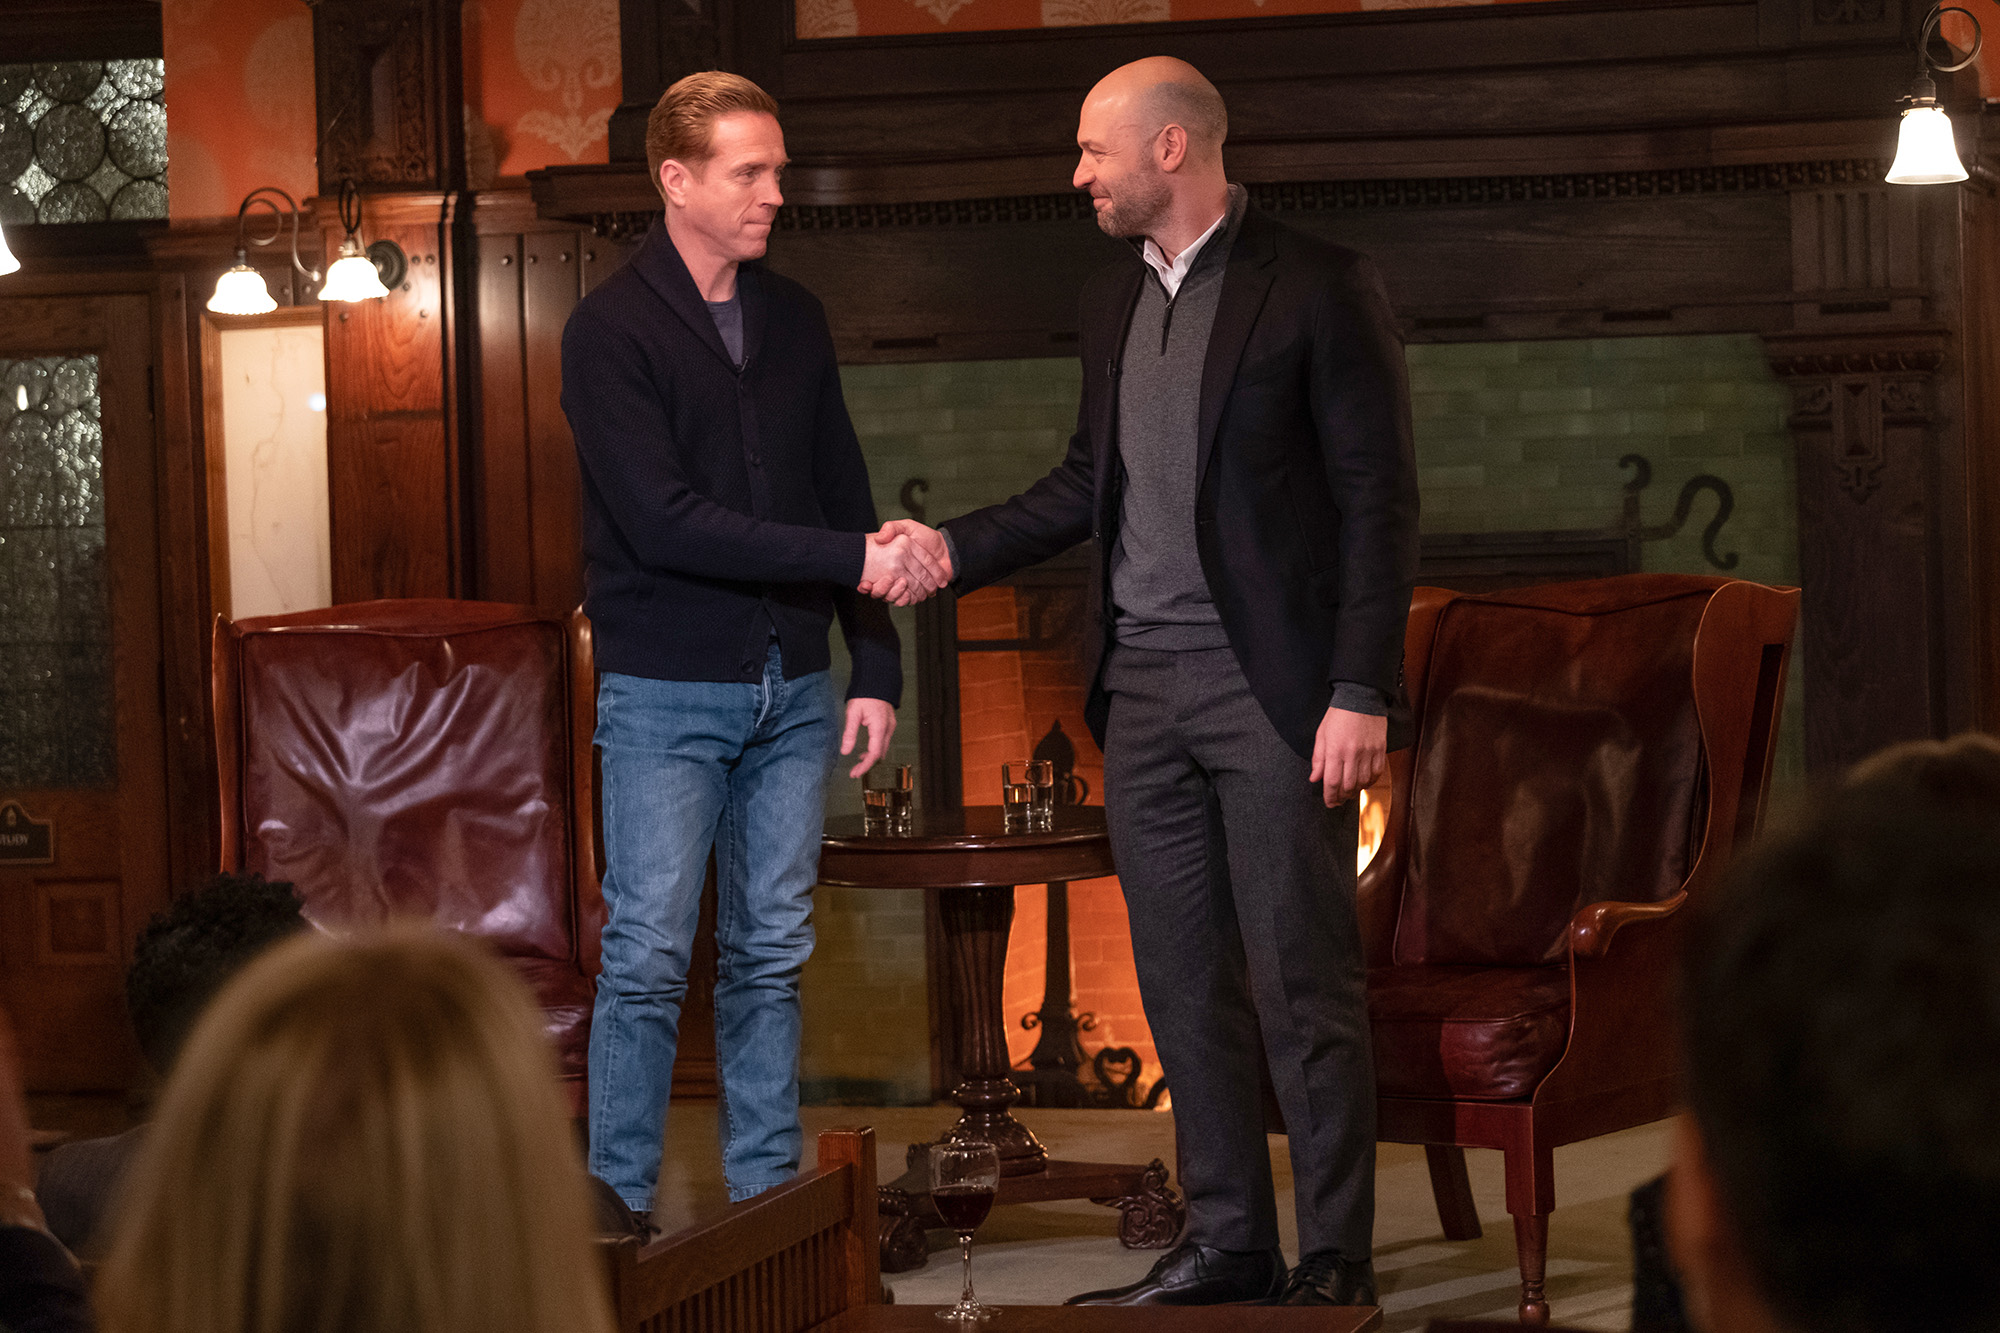 Damian Lewis as Bobby “Axe” Axelrod and Corey Stoll as Michael Prince in “Billions.”